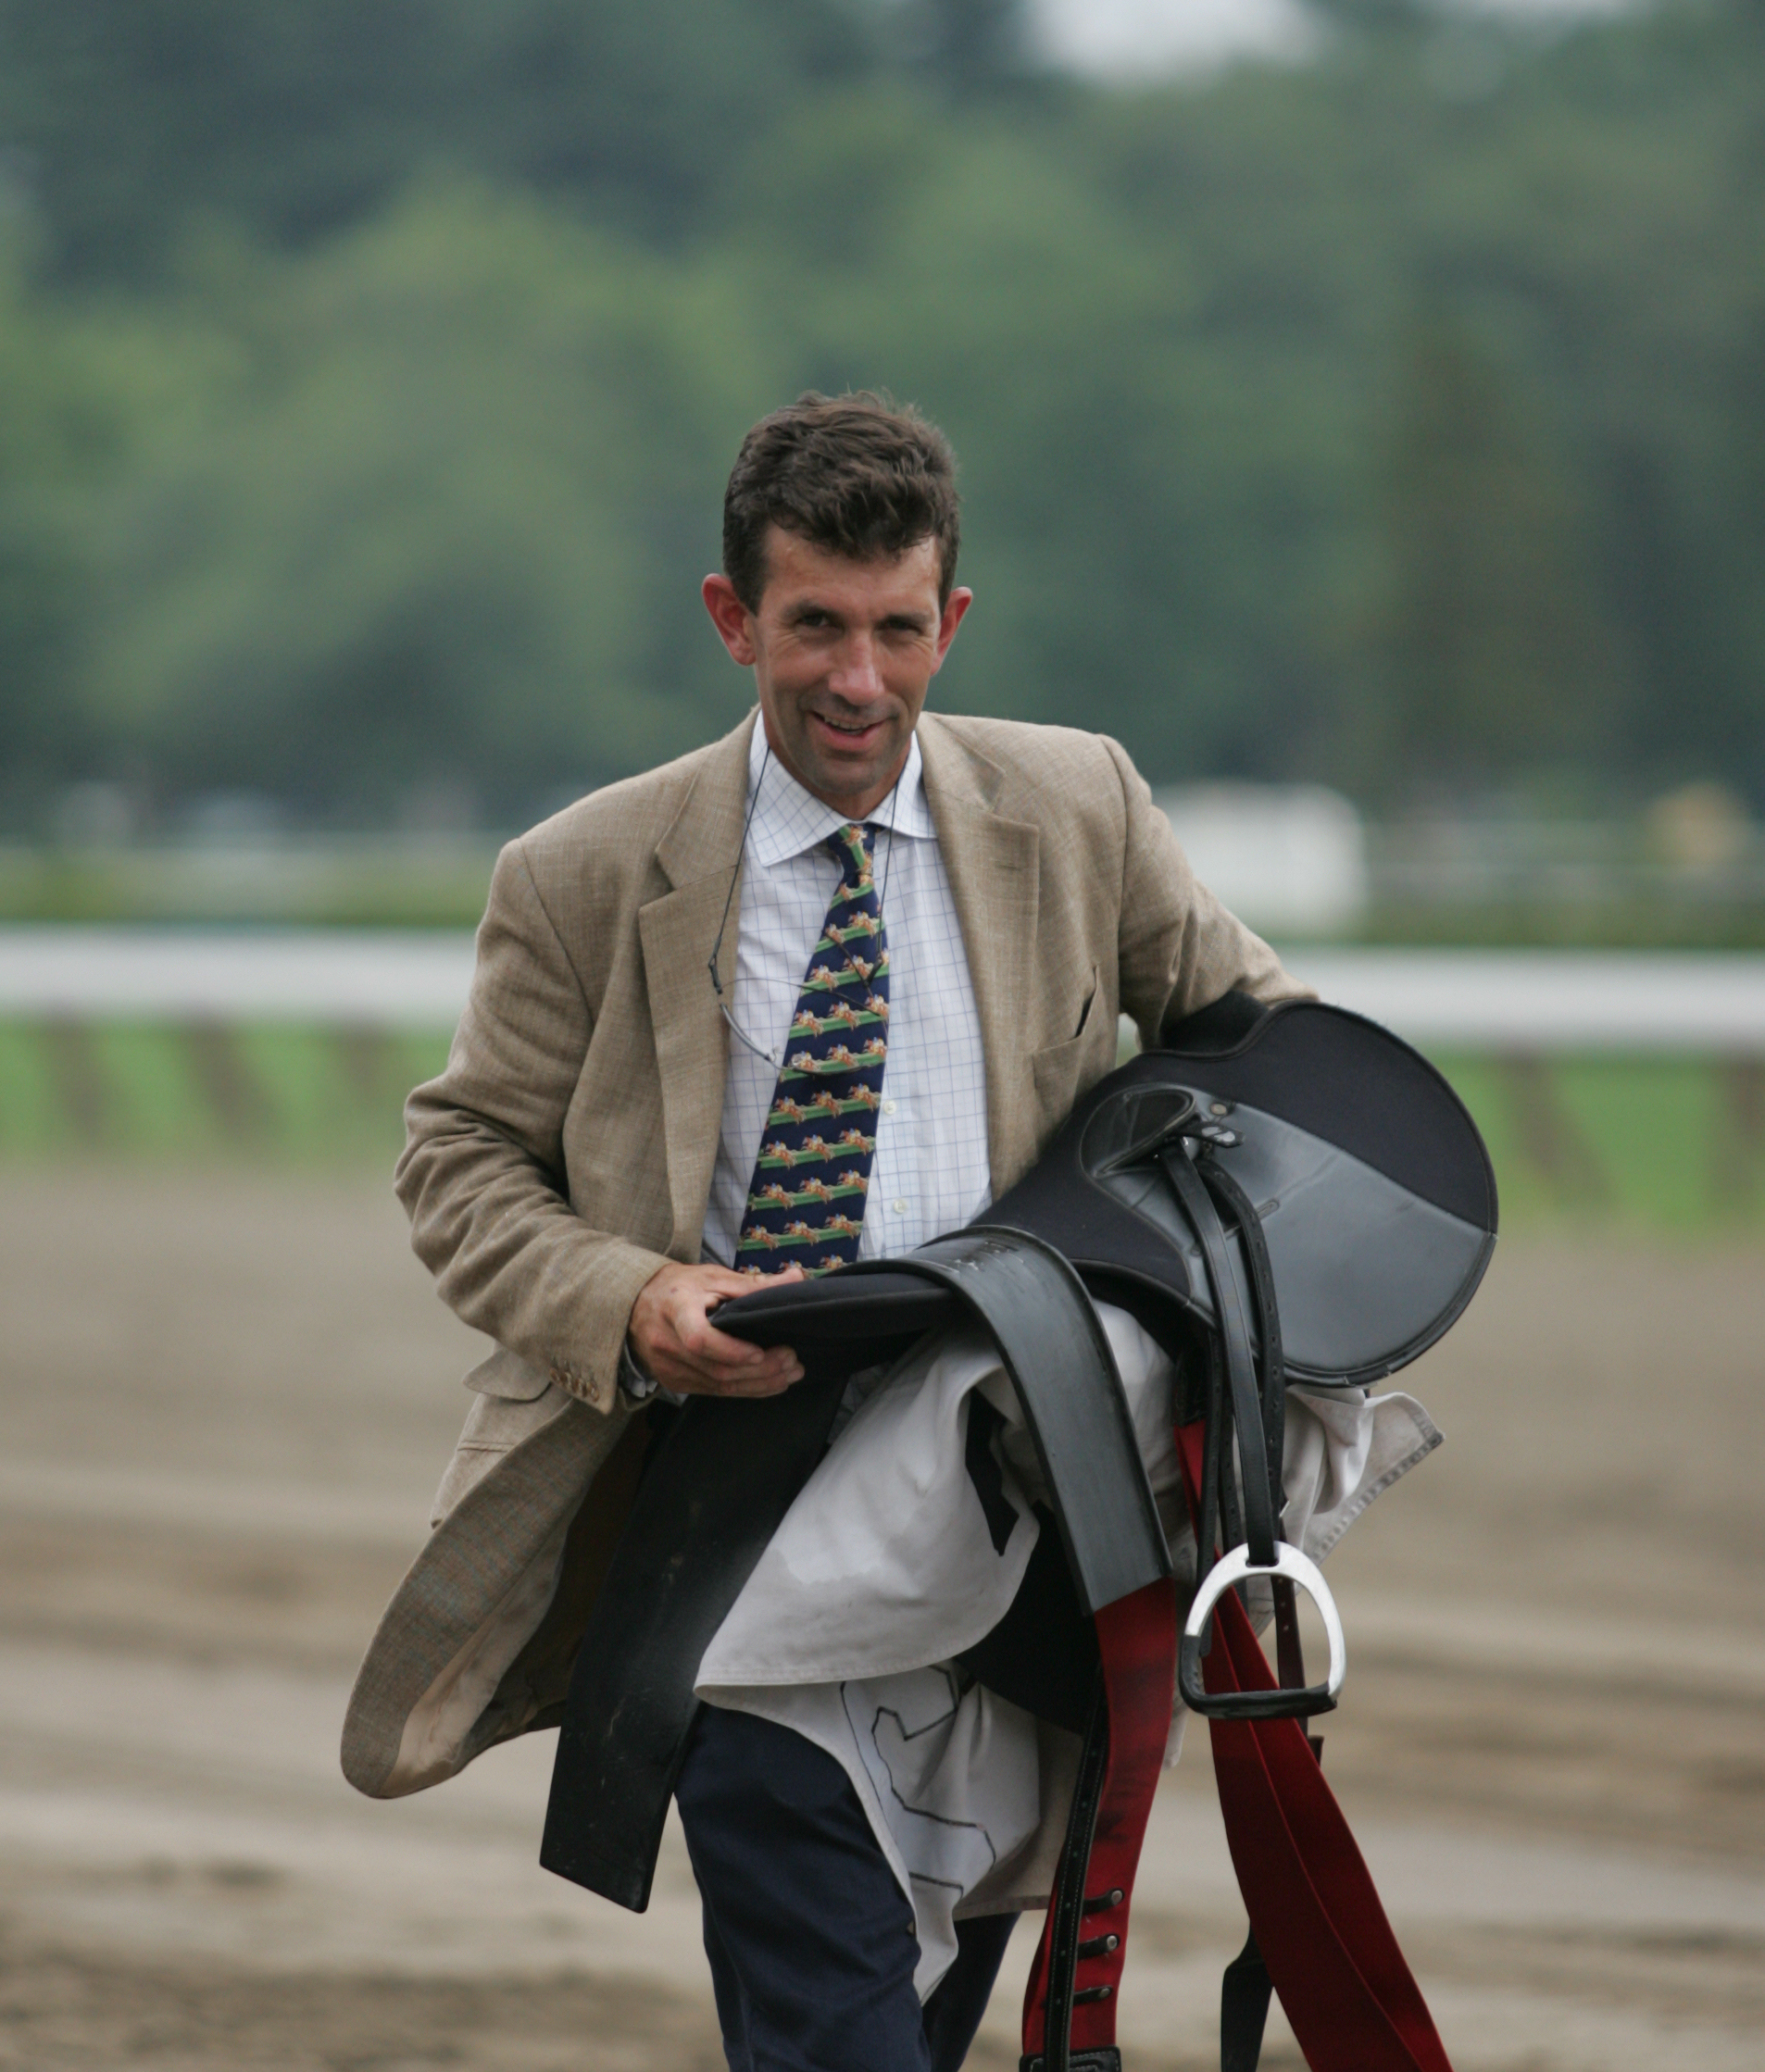 Jack Fisher at Saratoga Race Course (Tod Marks)